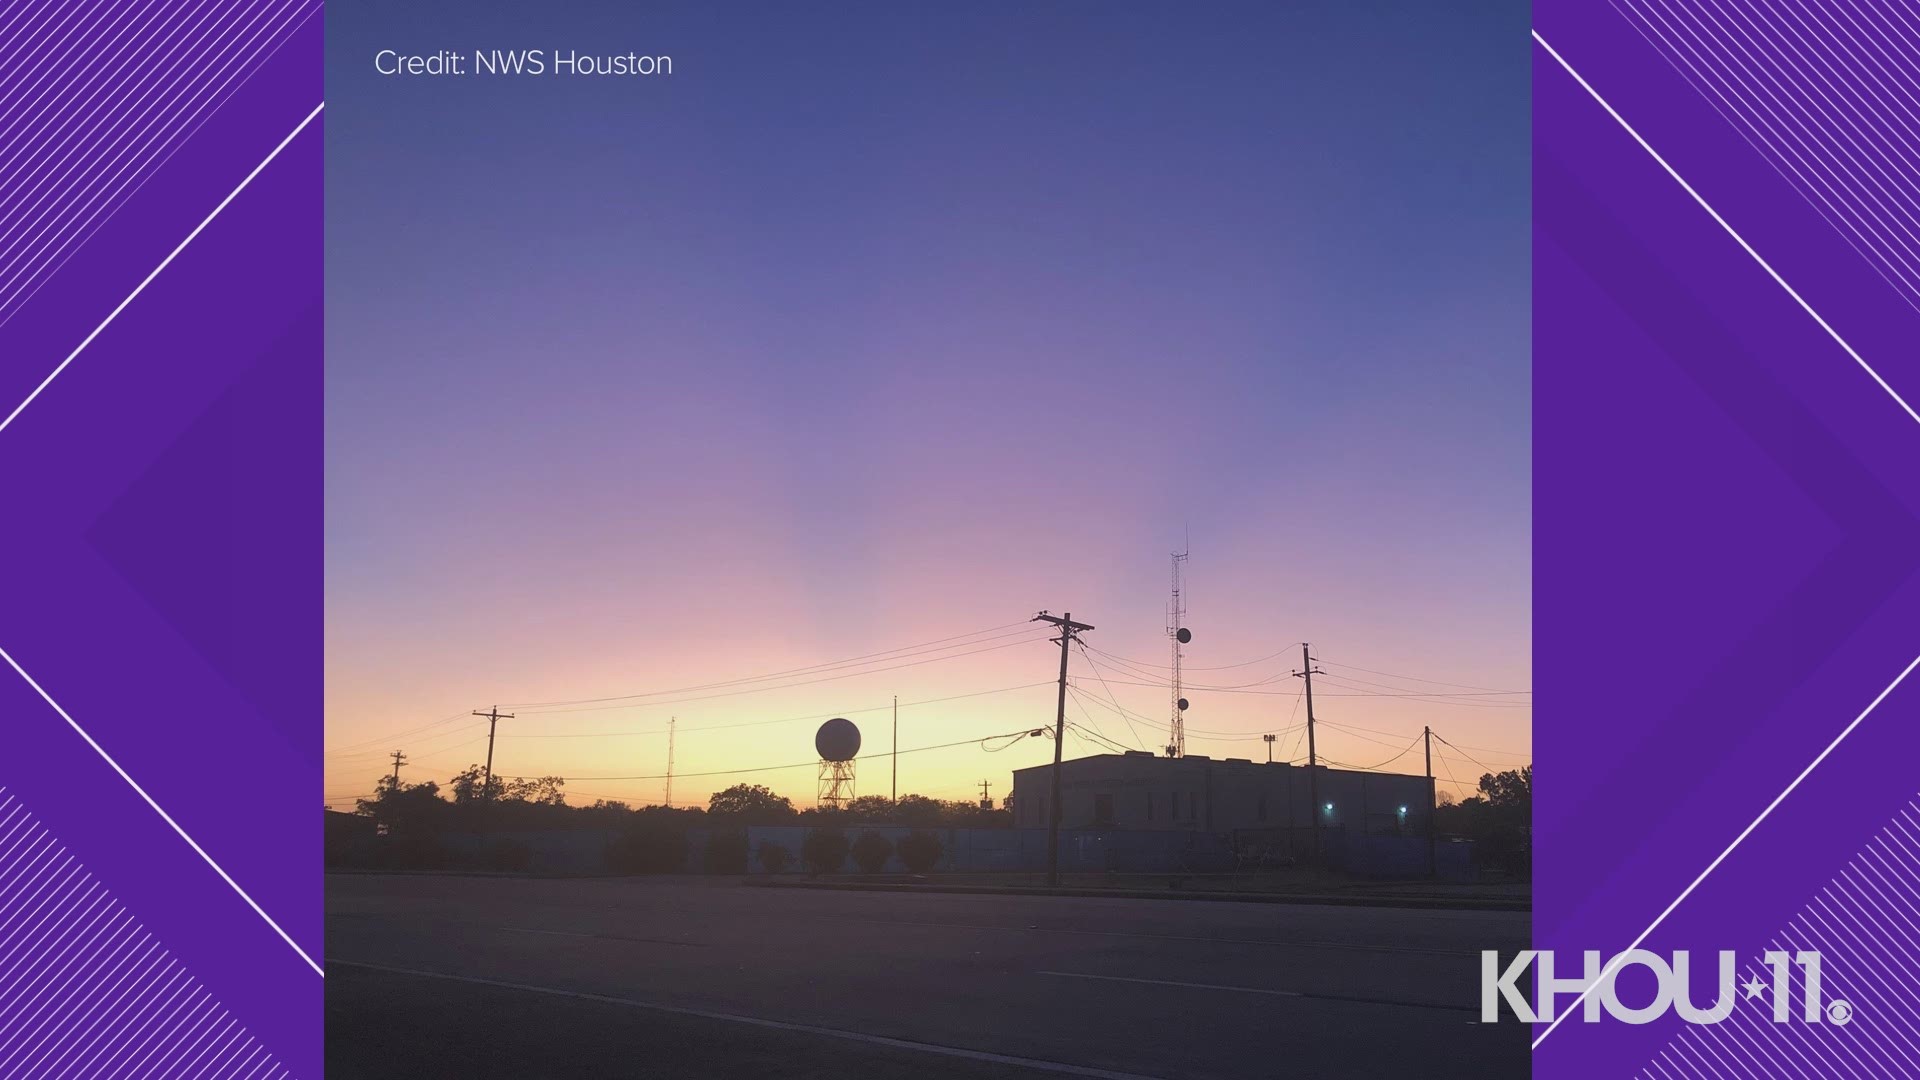 Thousands of miles away and several miles about the earth's surface. Here's how dust particles made their way overseas, giving us beautiful sunrises and sunsets.